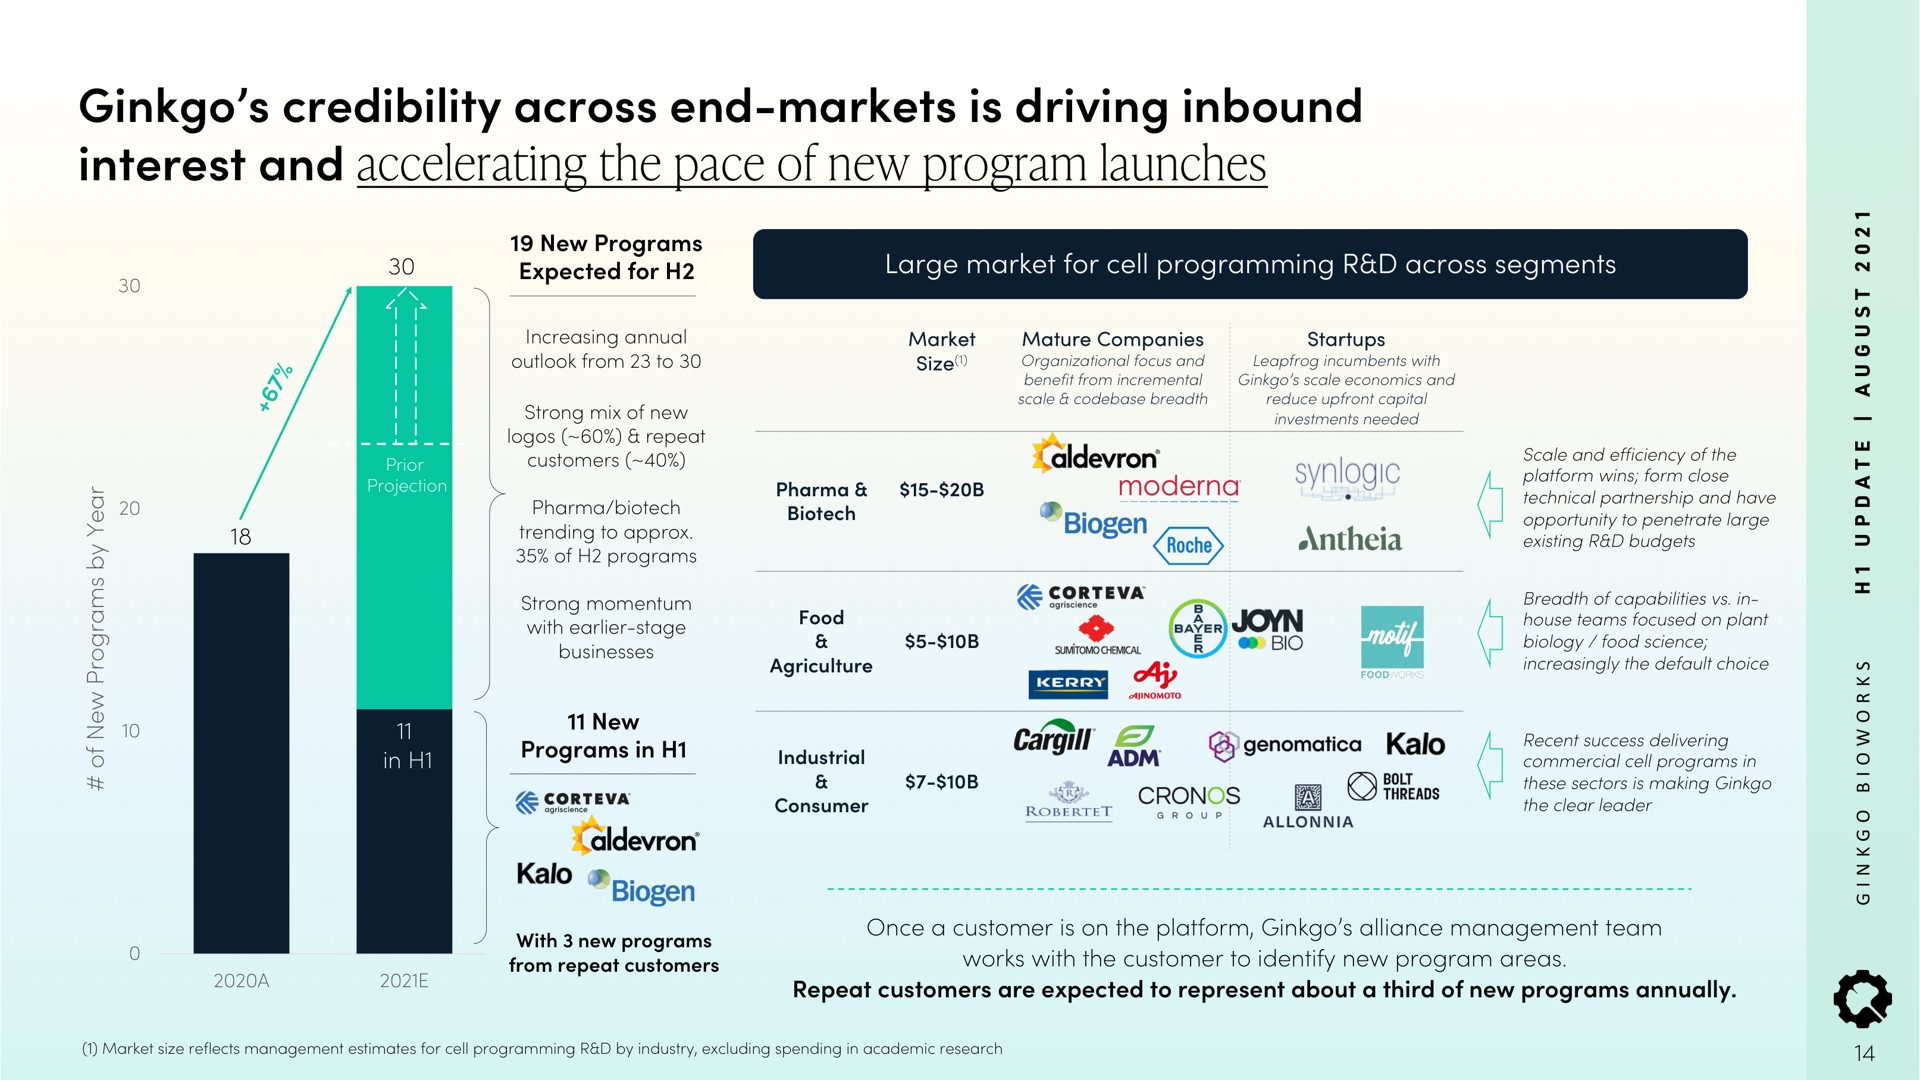 ginkgo credibility across end markets is driving inbound interest and accelerating the pace of new program launches | Ginkgo